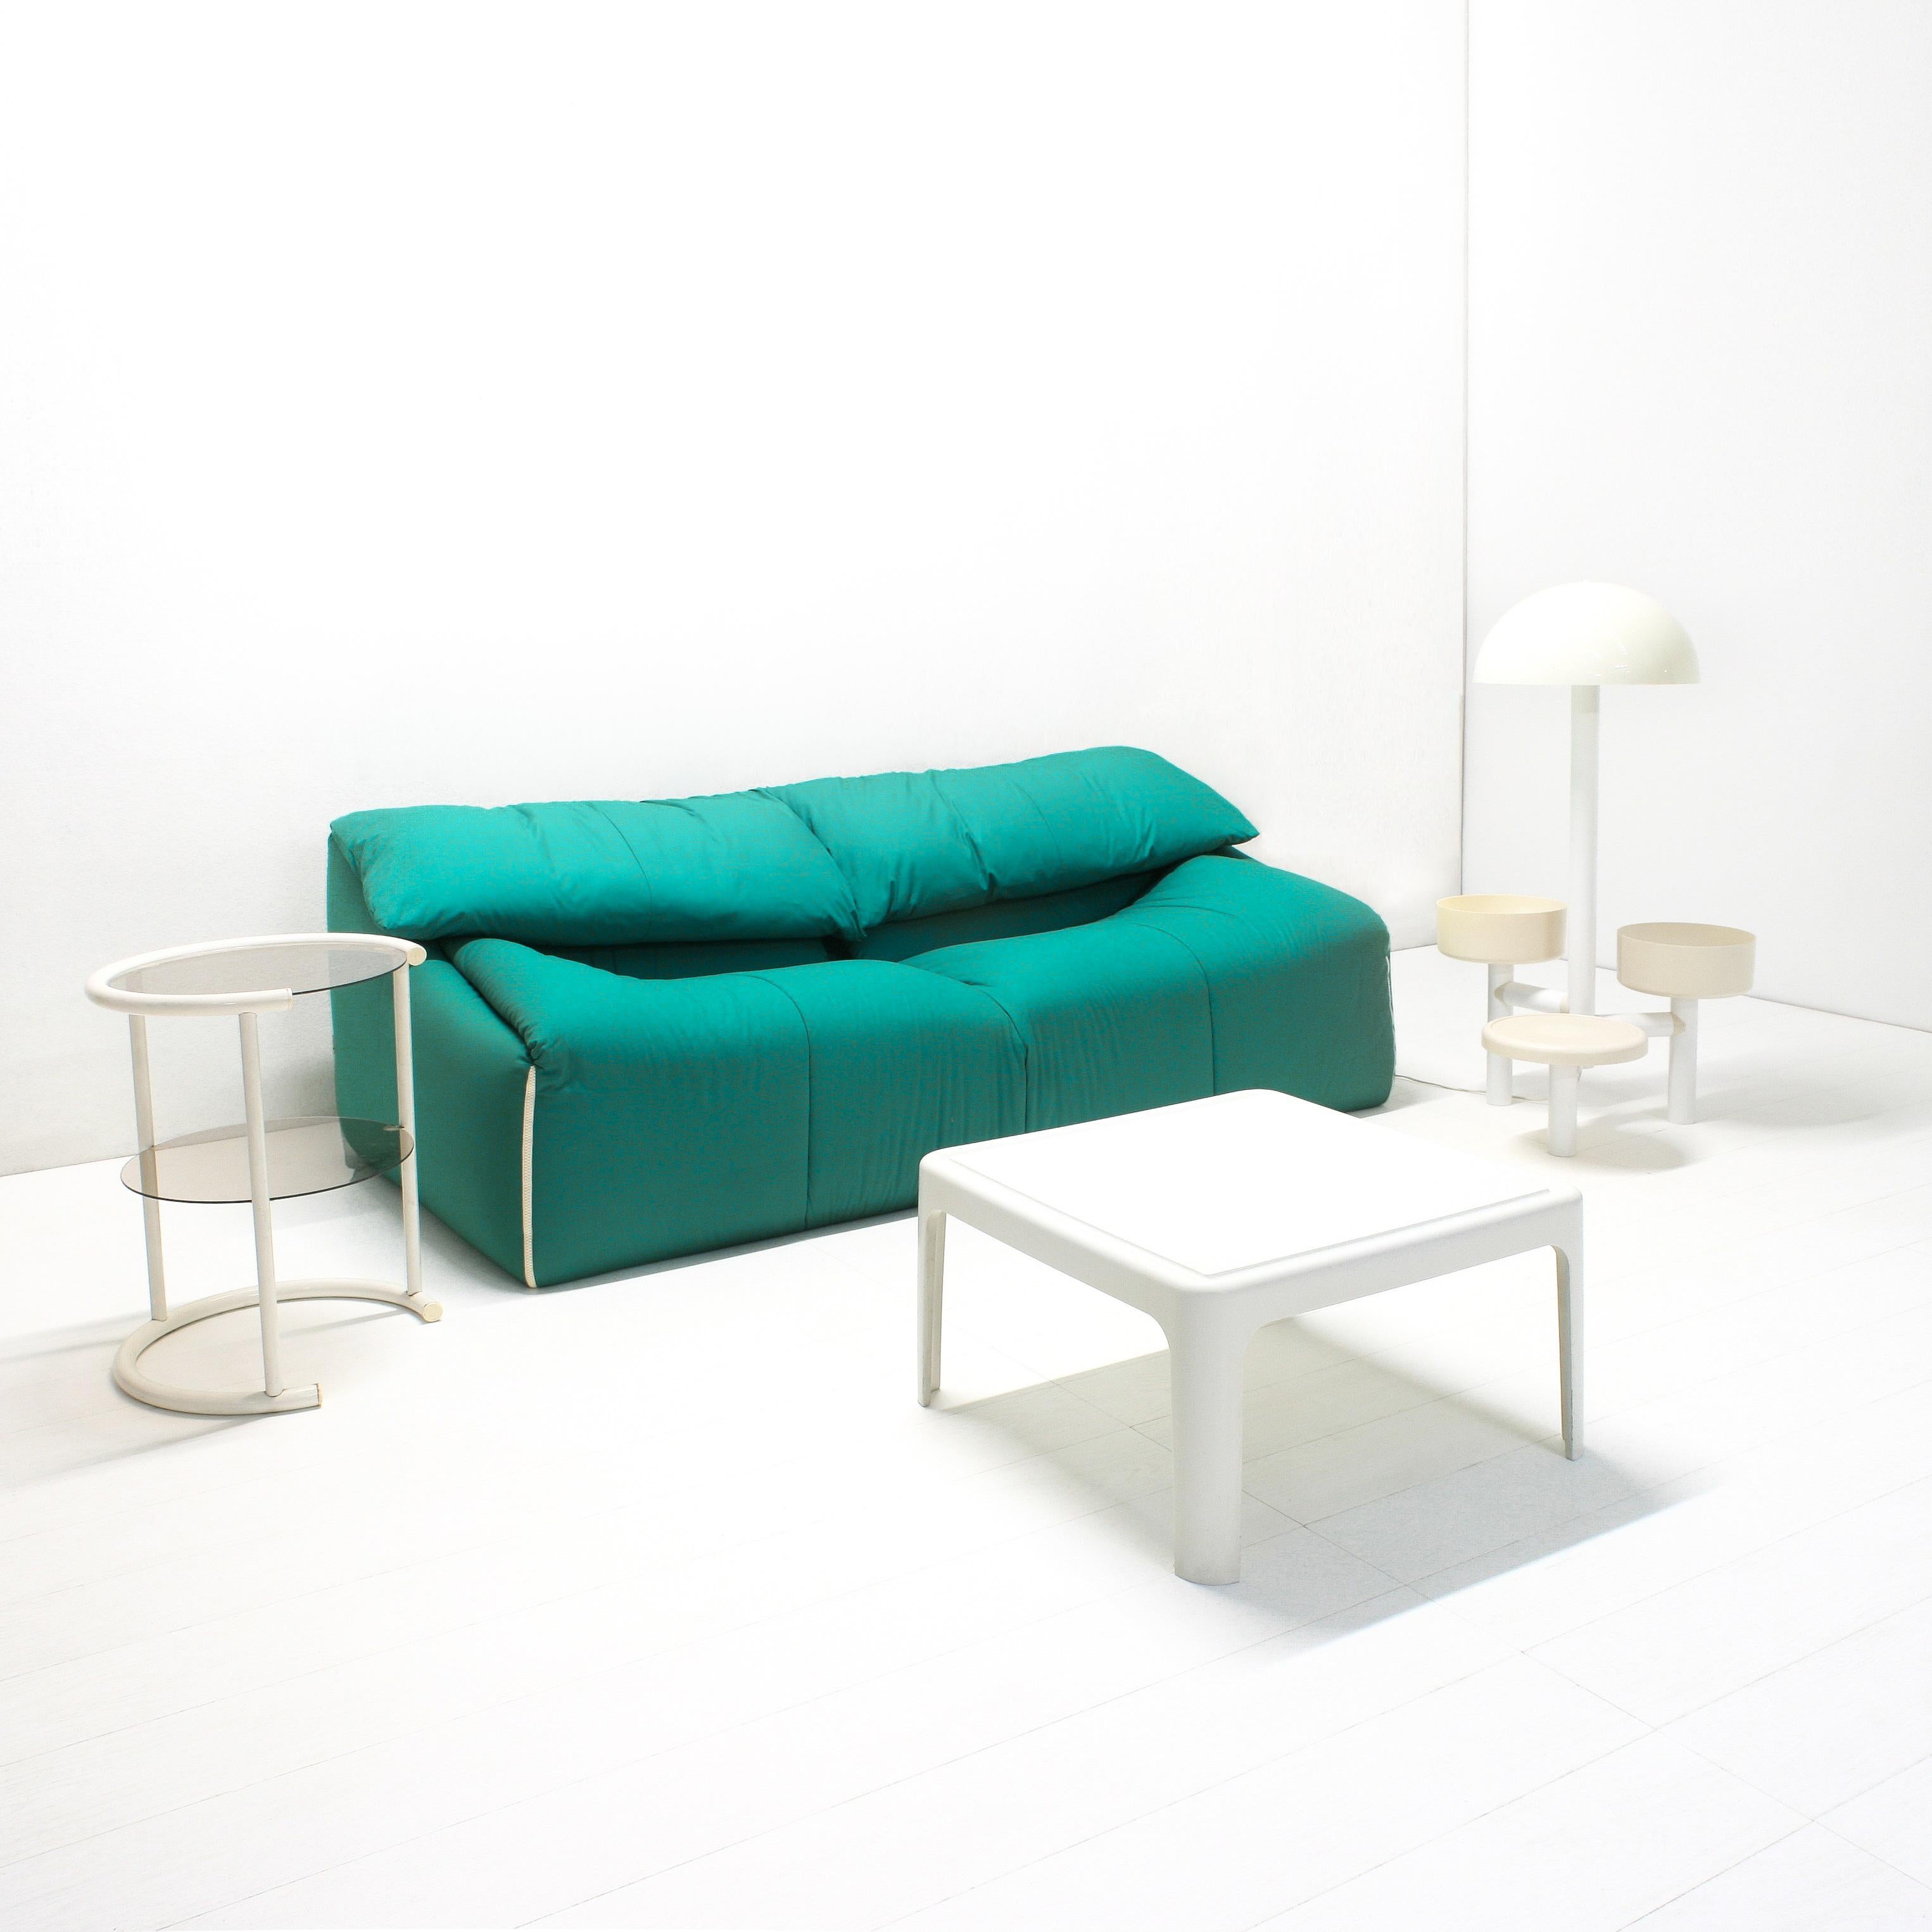 A super comfortable Plumy large two-seater sofa designed in 1980 by Annie Hiéronimus for Cinna, France.

This sofa is still in great condition. with its very nineties soft to touch turquoise/green upholstery and adaptable cushions makes it a great